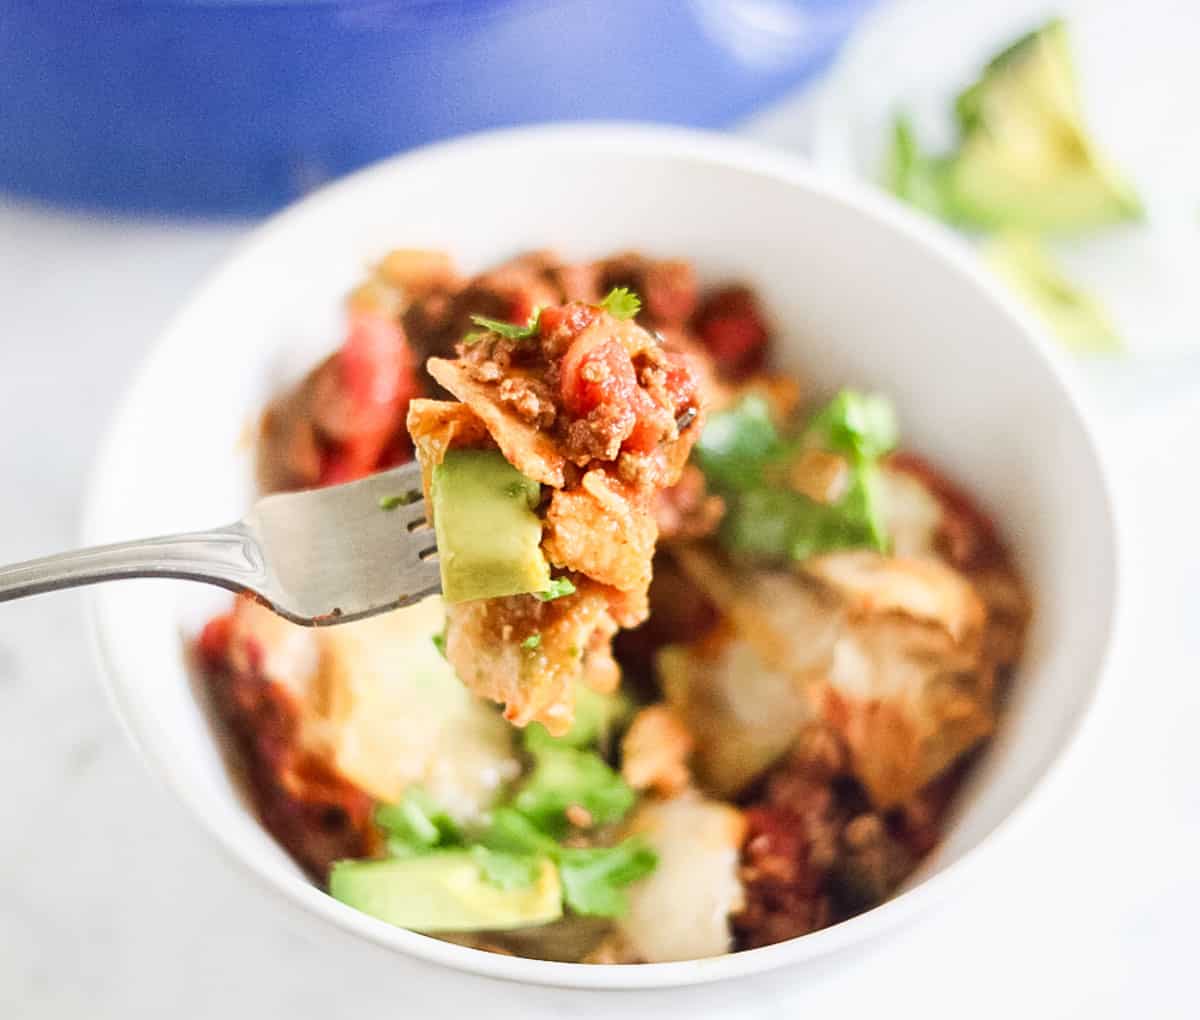 fork holding a bite of taco casserole over a bowl of the casserole topped with avocado and cilantro.